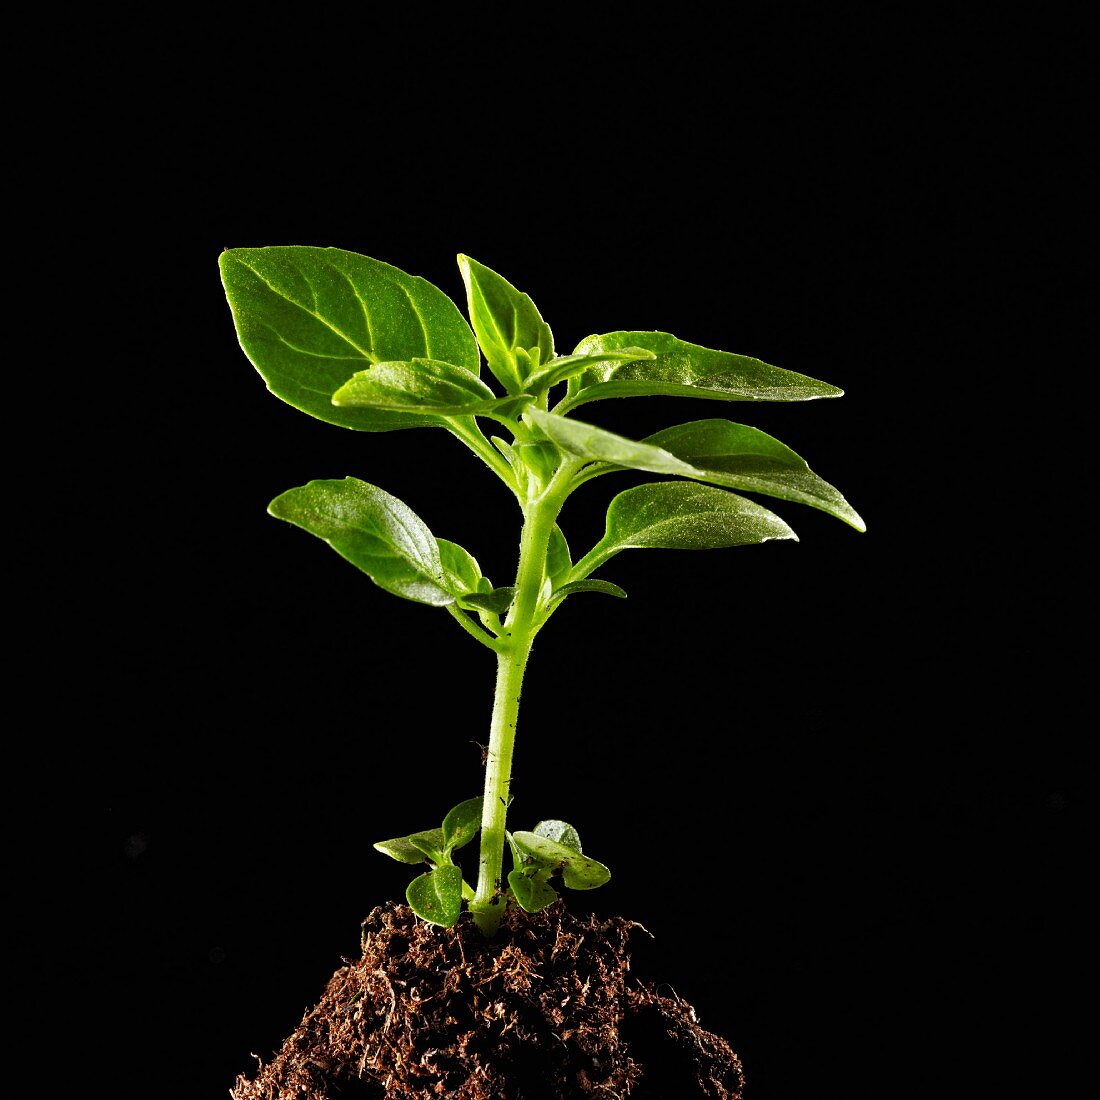 A basil plant growing out of a pile of soil